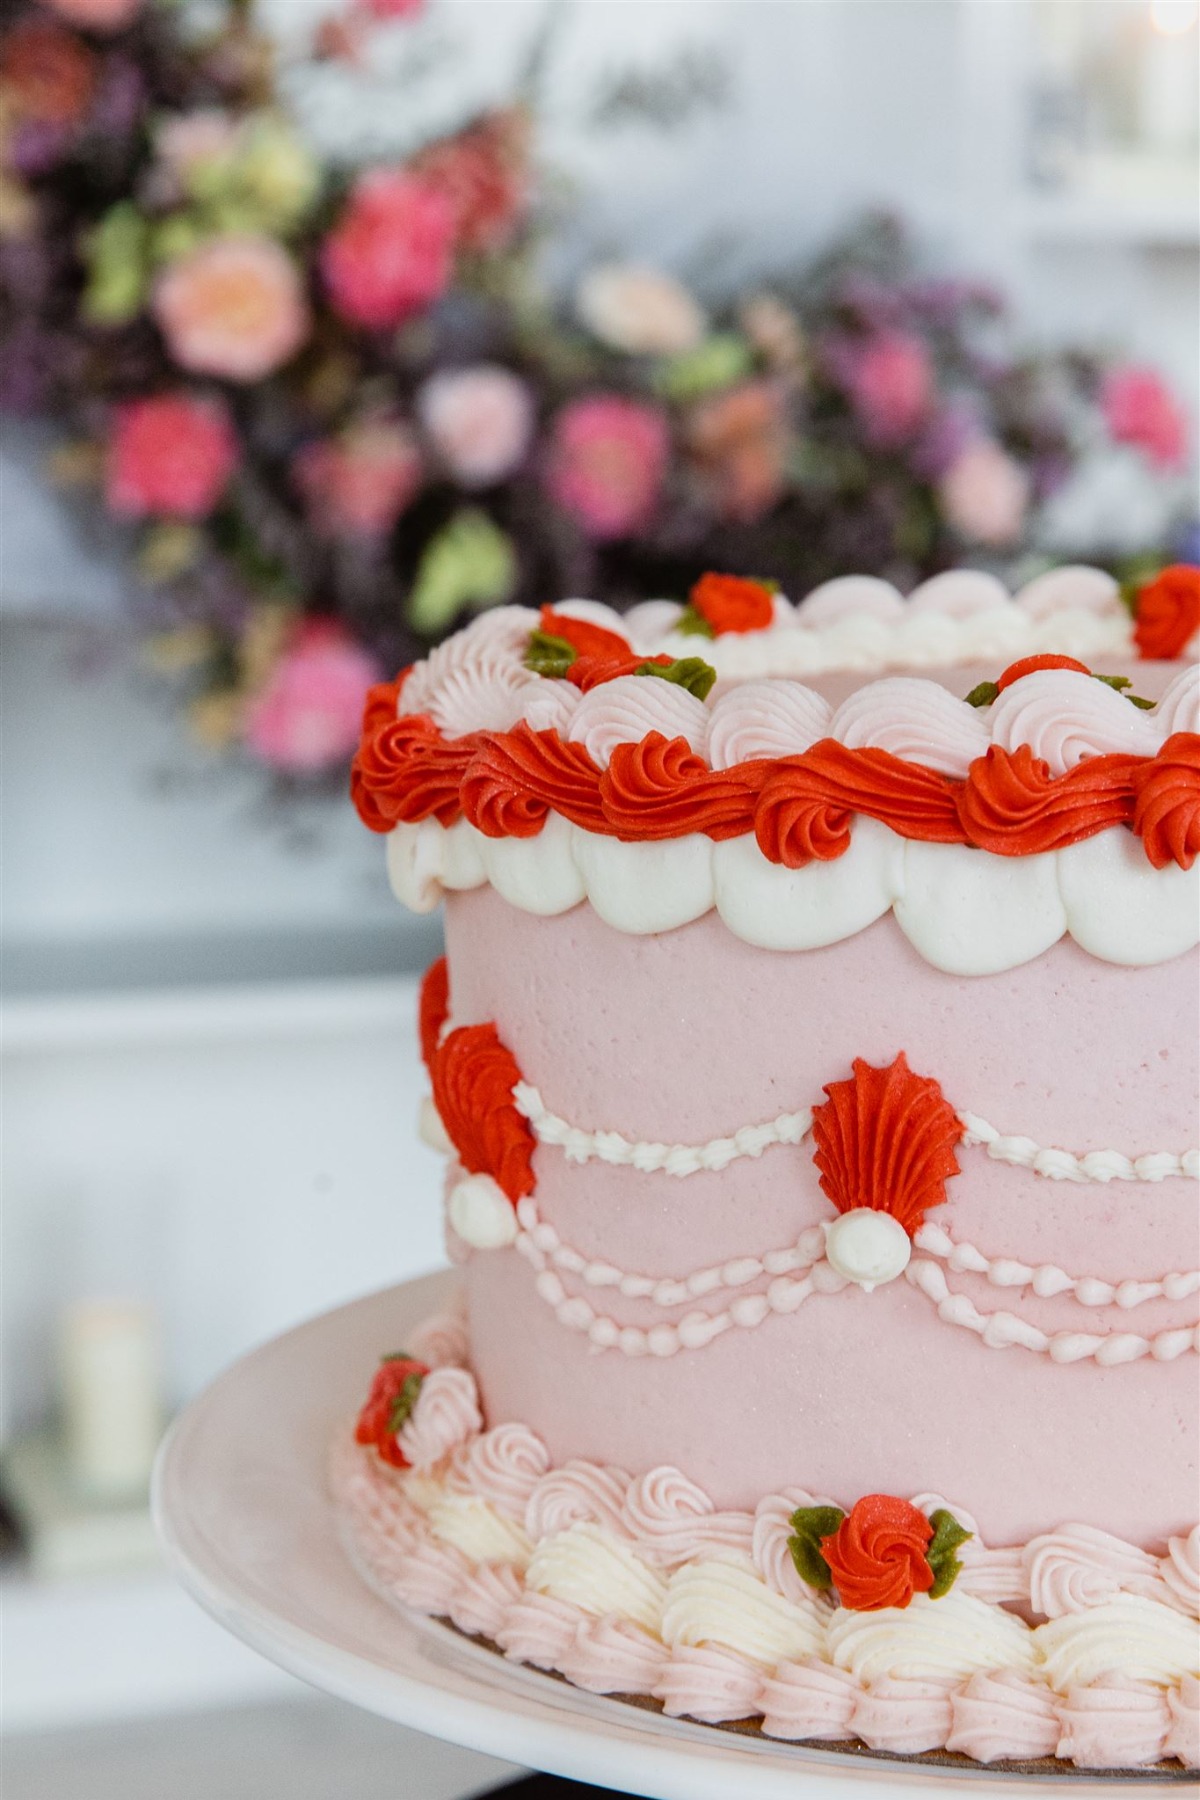 Vintage pink and red wedding cake 